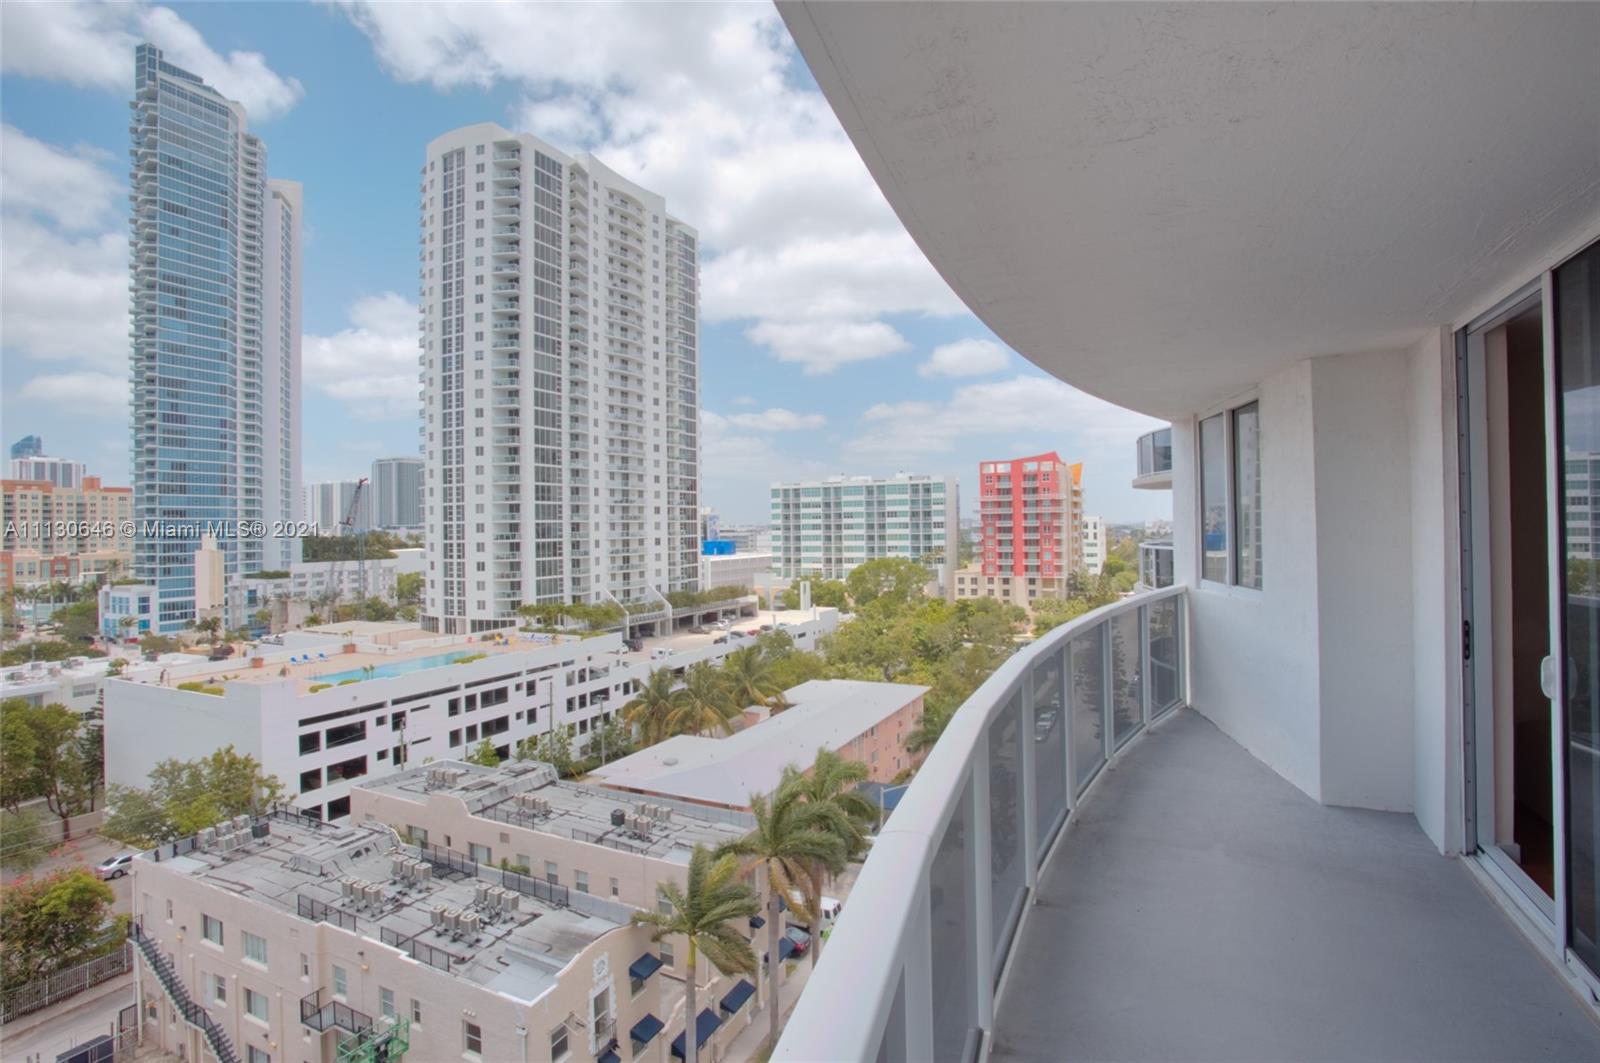 Spectacular 2 bedroom & 2 bathrooms. Amazing Miami Beach skylines and bay views. Modern kitchen, stainless steel appliances, cherry laminate wood floors, granite countertops, and Berber carpet in bedrooms. The building offers a gym, pool, and a social room.